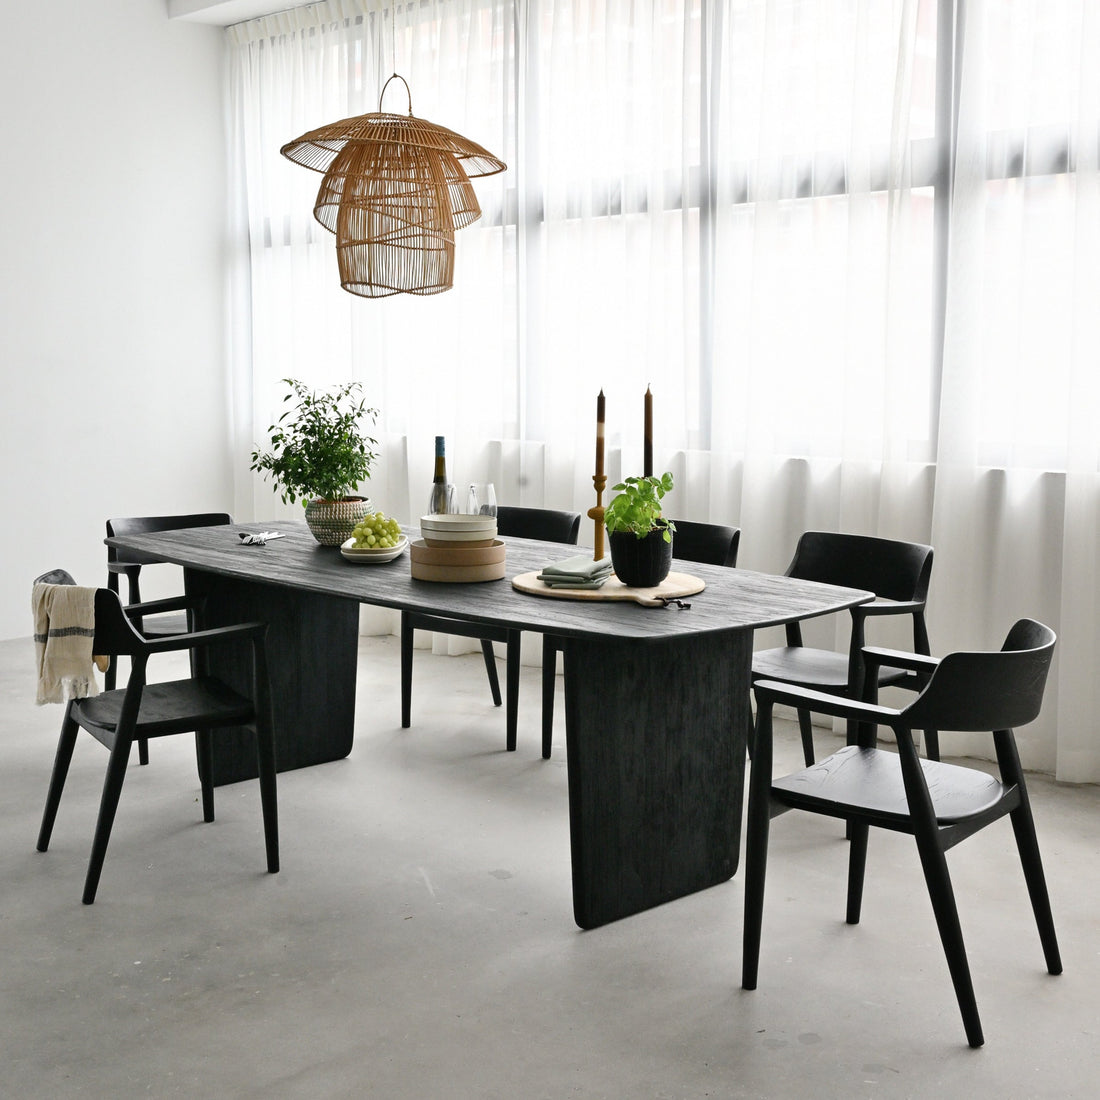 Molly Dining Table in Black - L240cm